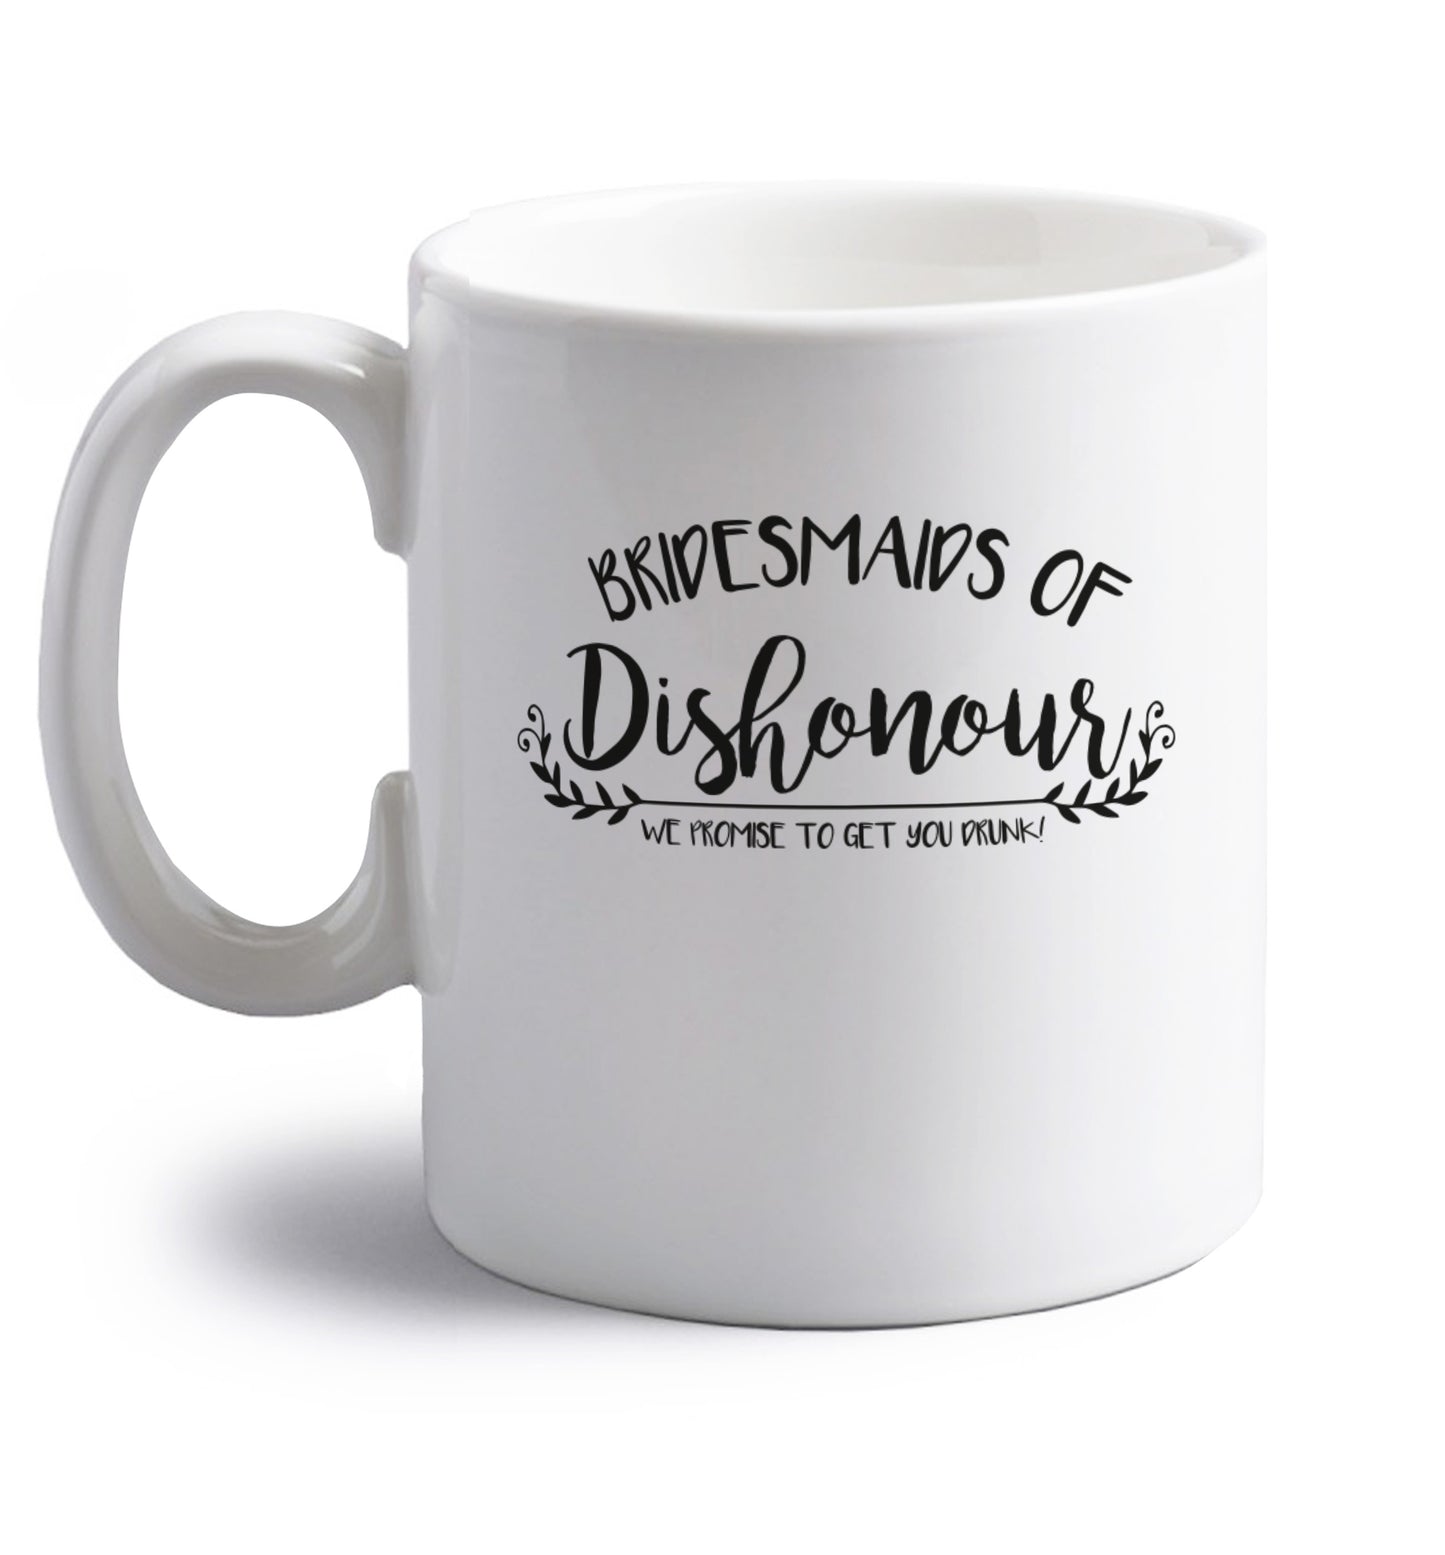 Bridesmaids of Dishonour we promise to get you drunk! right handed white ceramic mug 